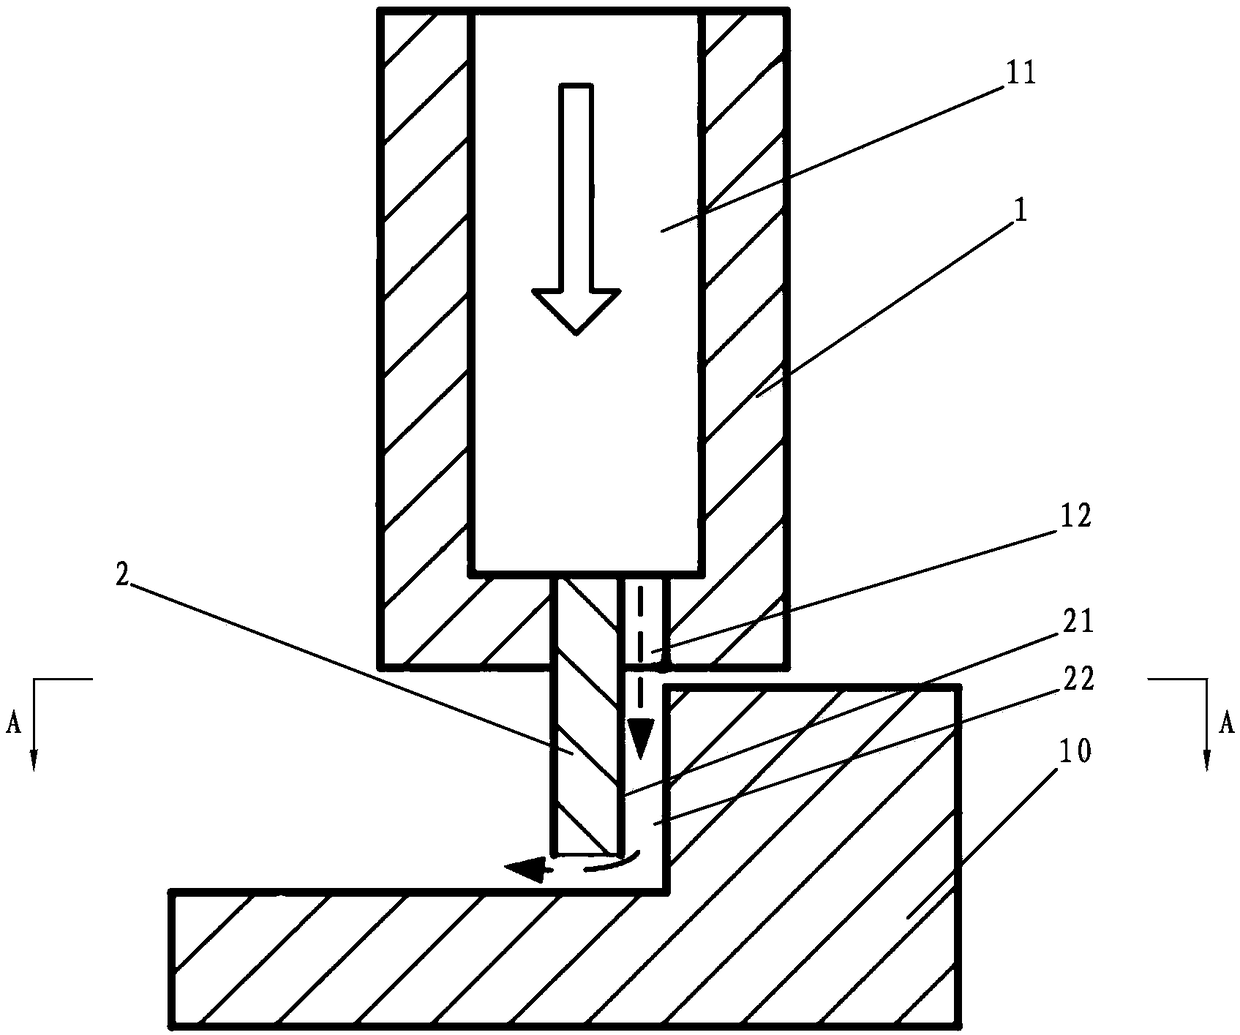 Novel electrolytic milling method and device for machined gap through electrolyte wall-attaching direct spraying